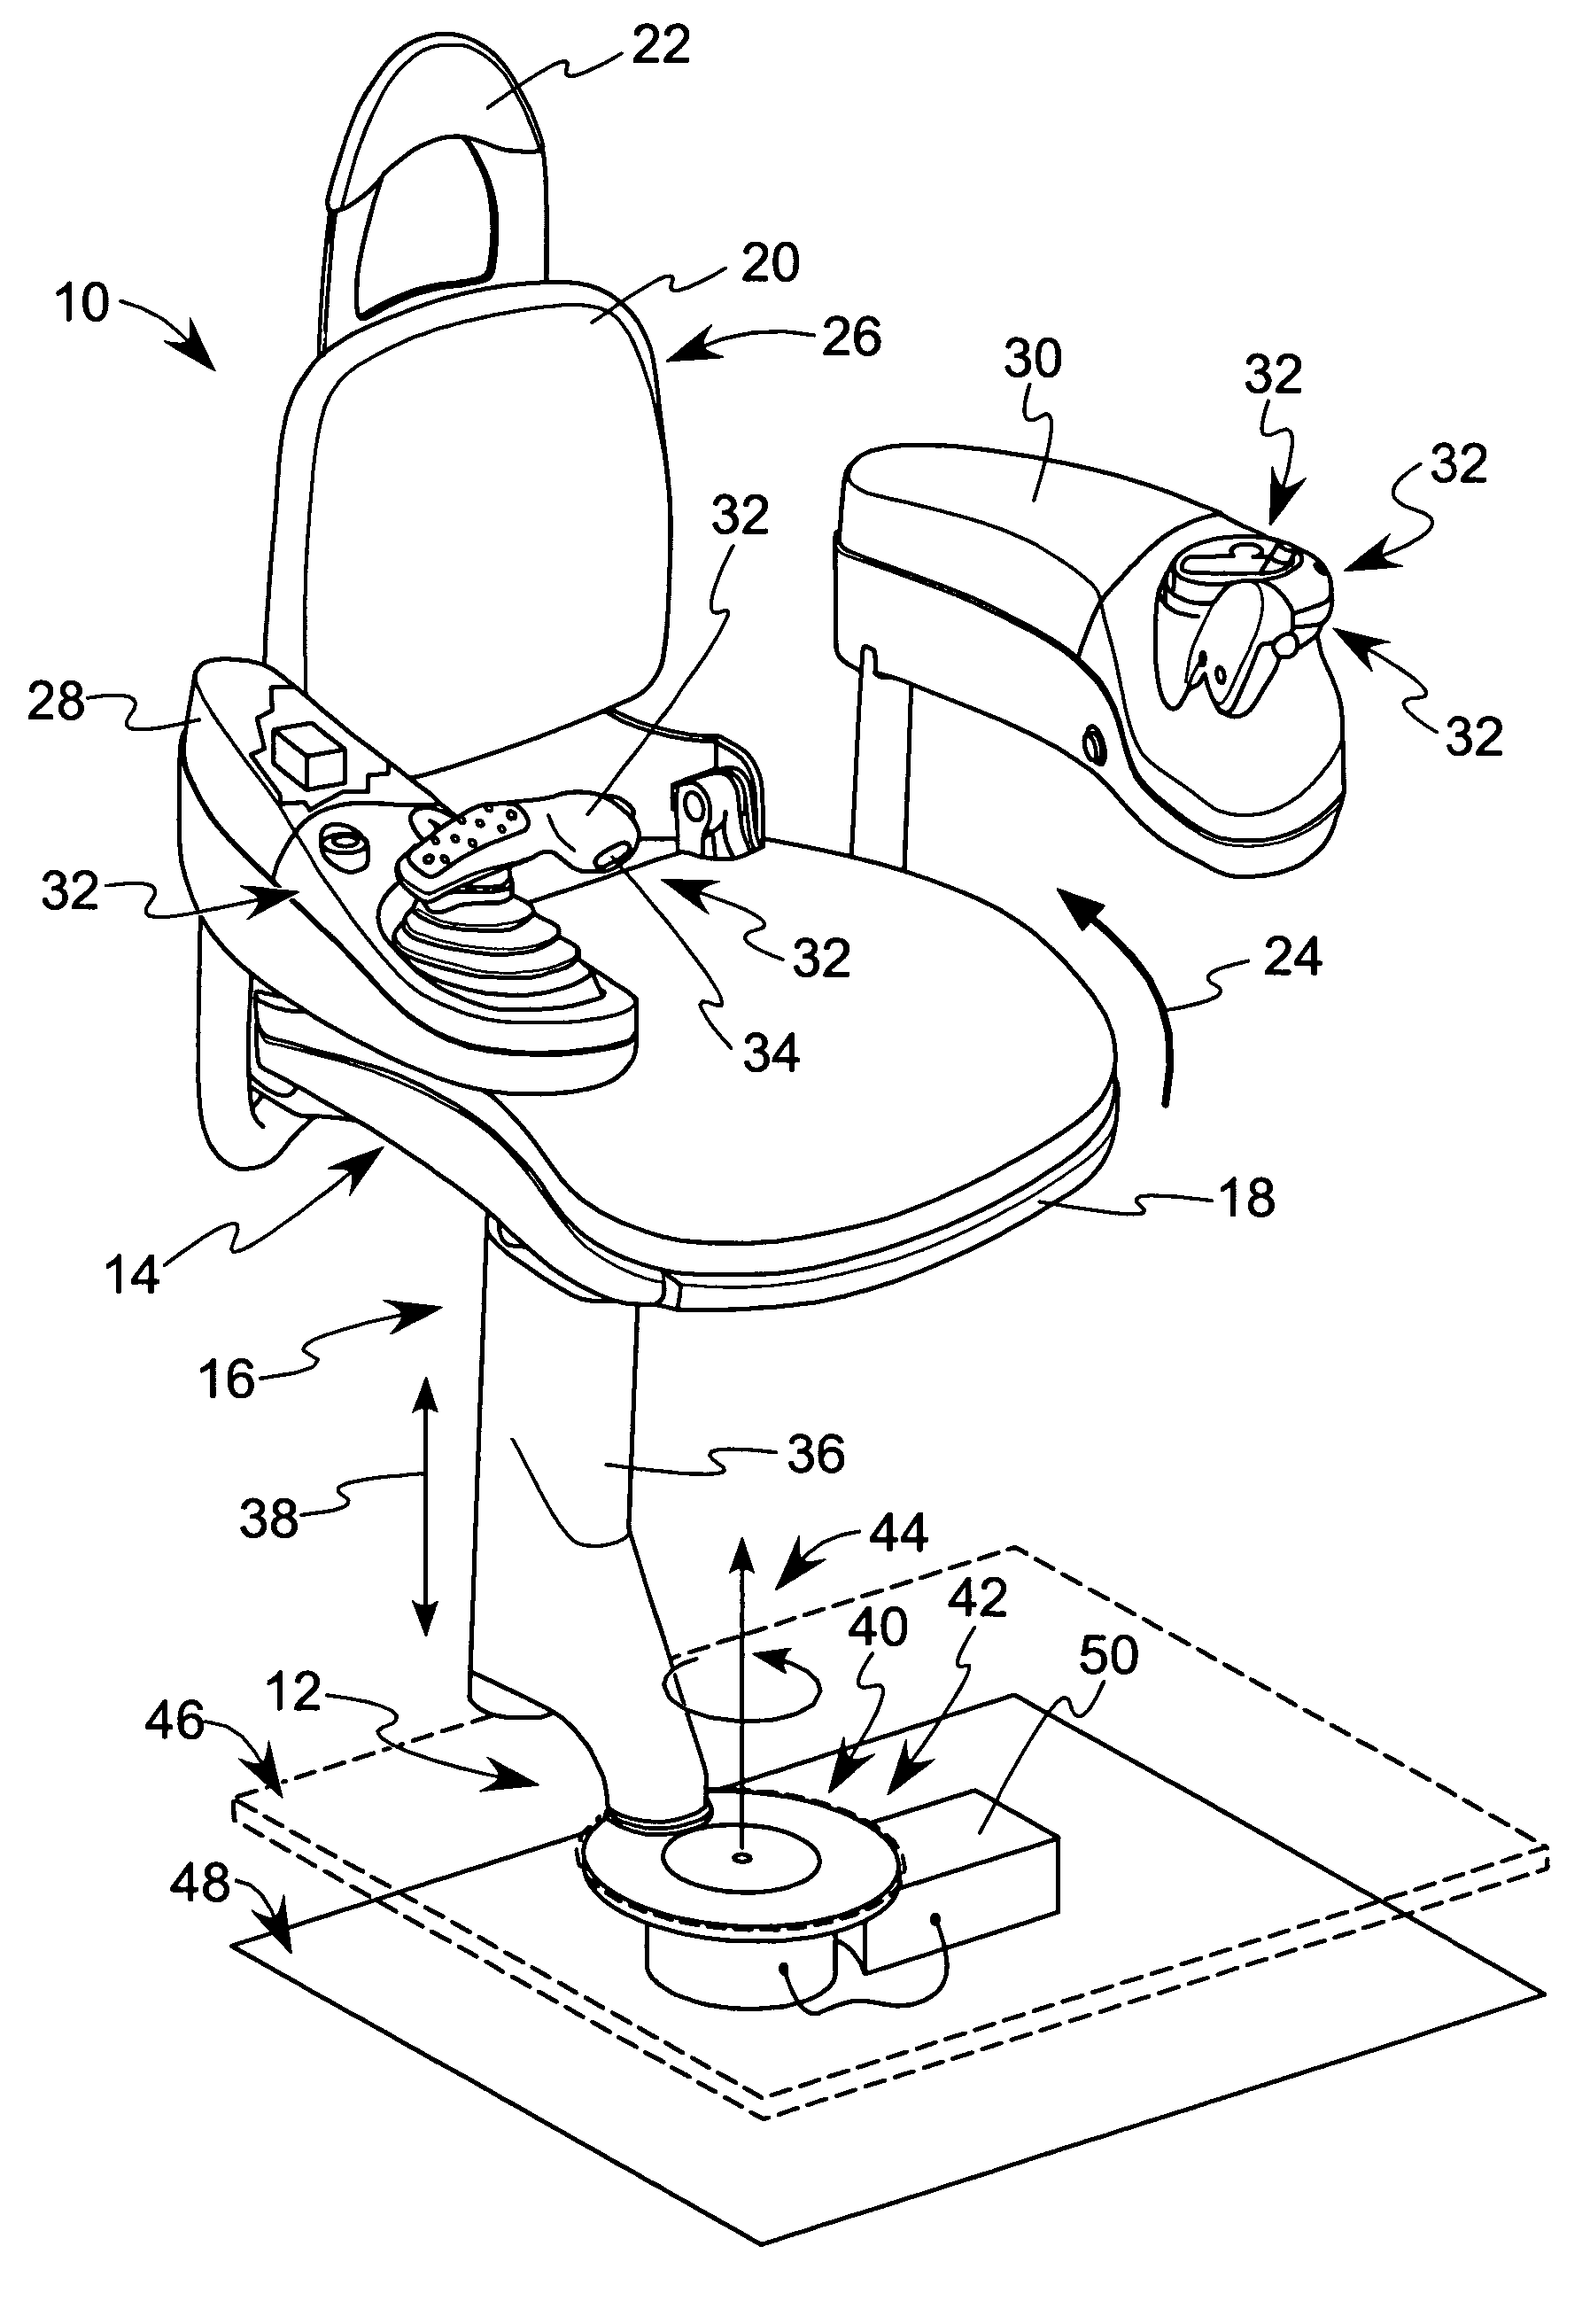 Systems and methods for seat repositioning